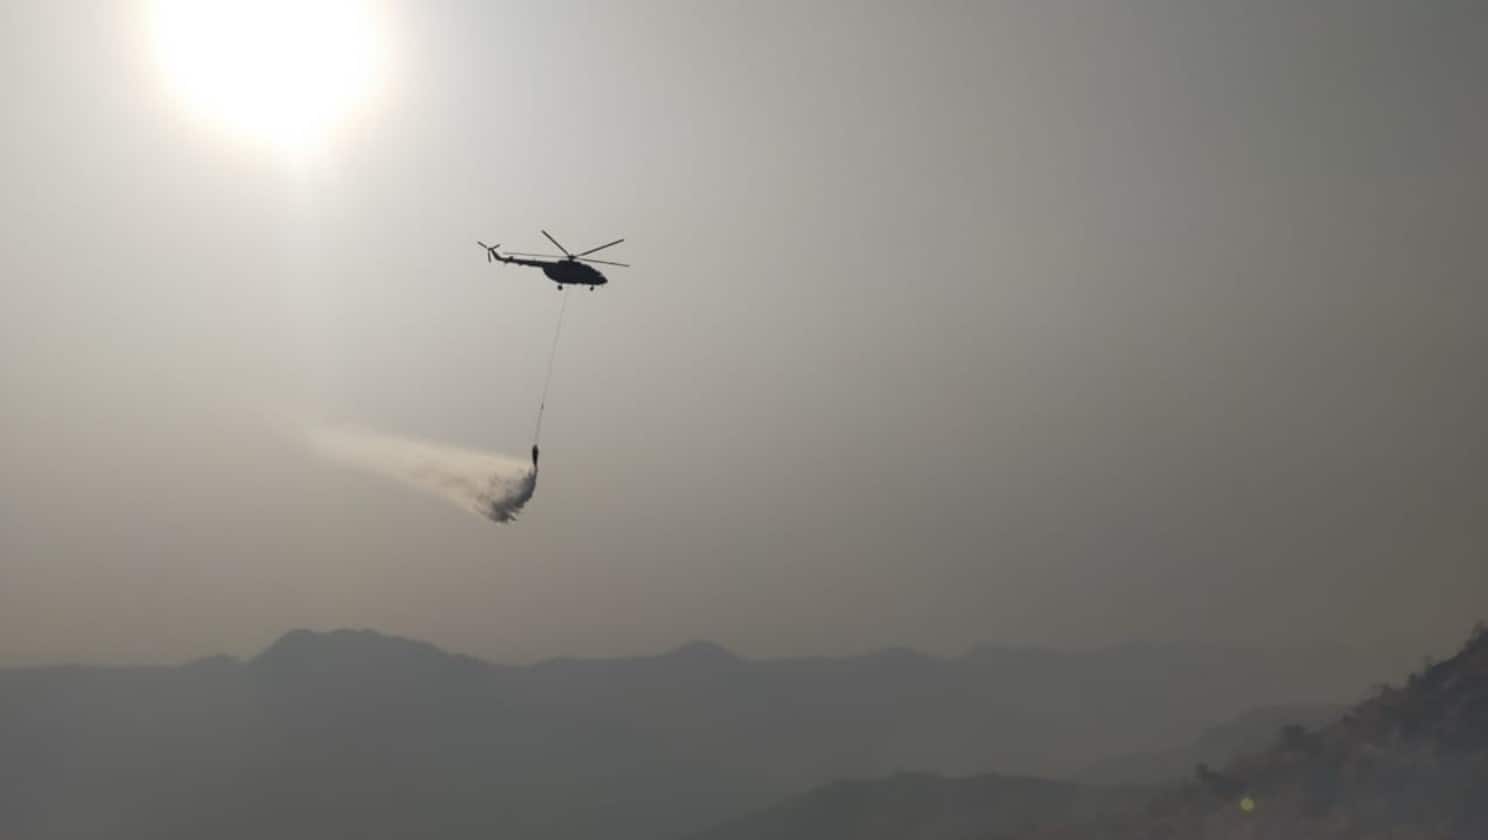 IAF helping in dousing forest fire